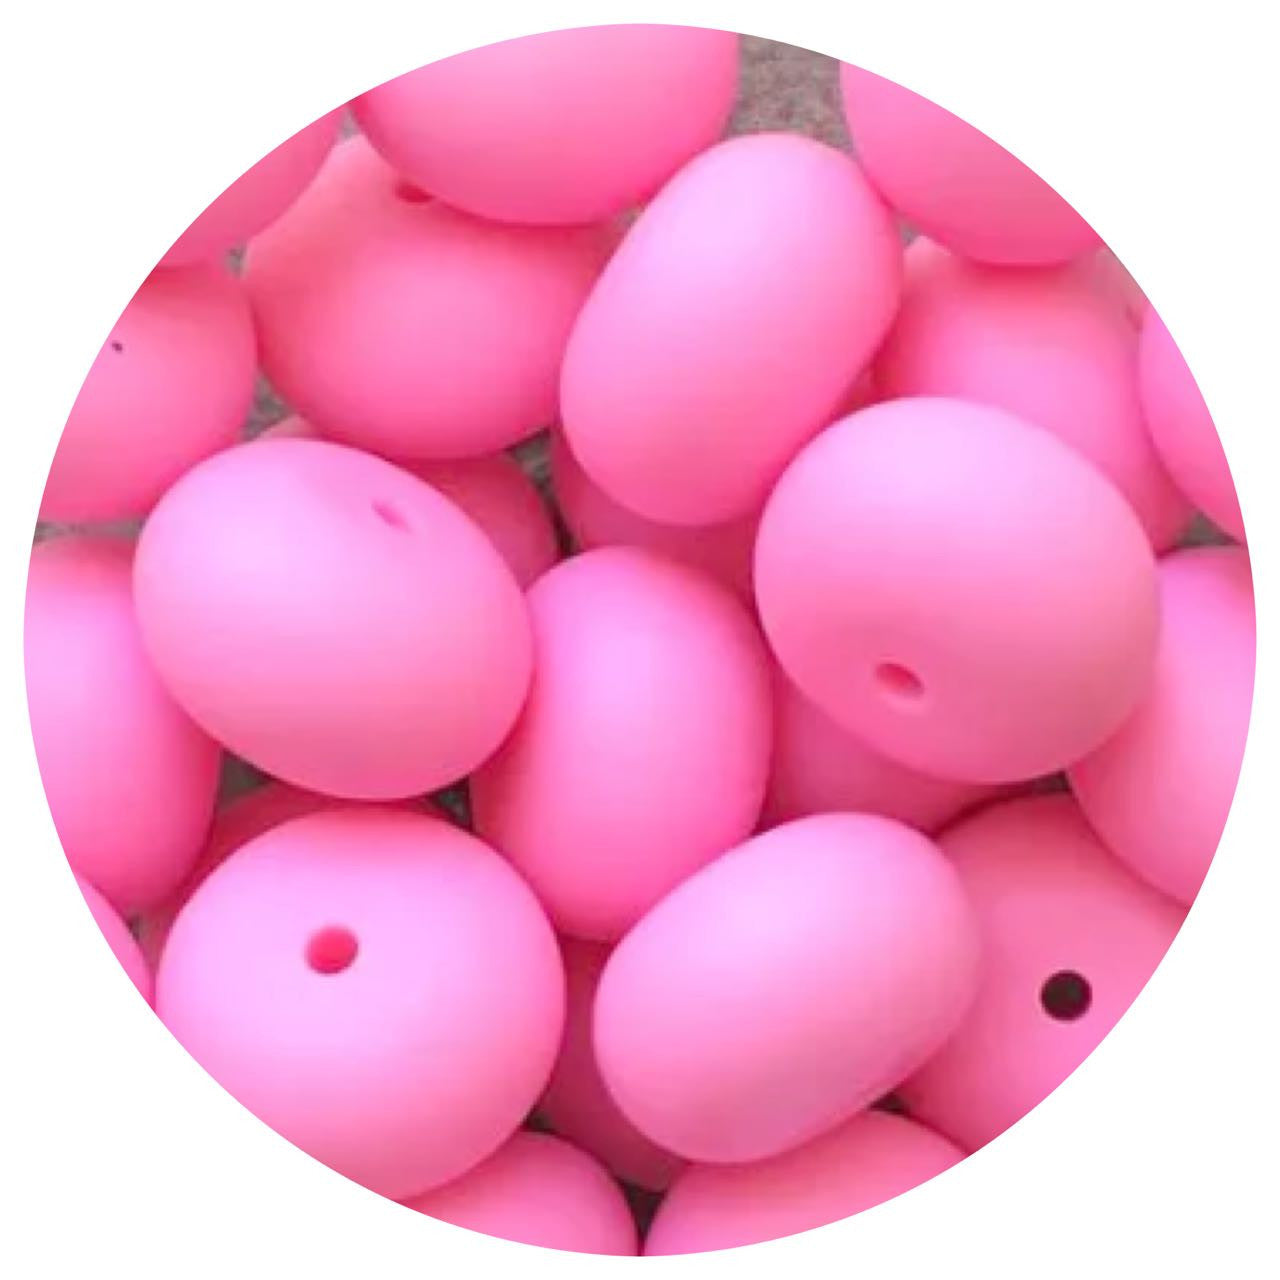 Bubblegum Pink - 22mm Abacus Silicone Beads - 5 Beads